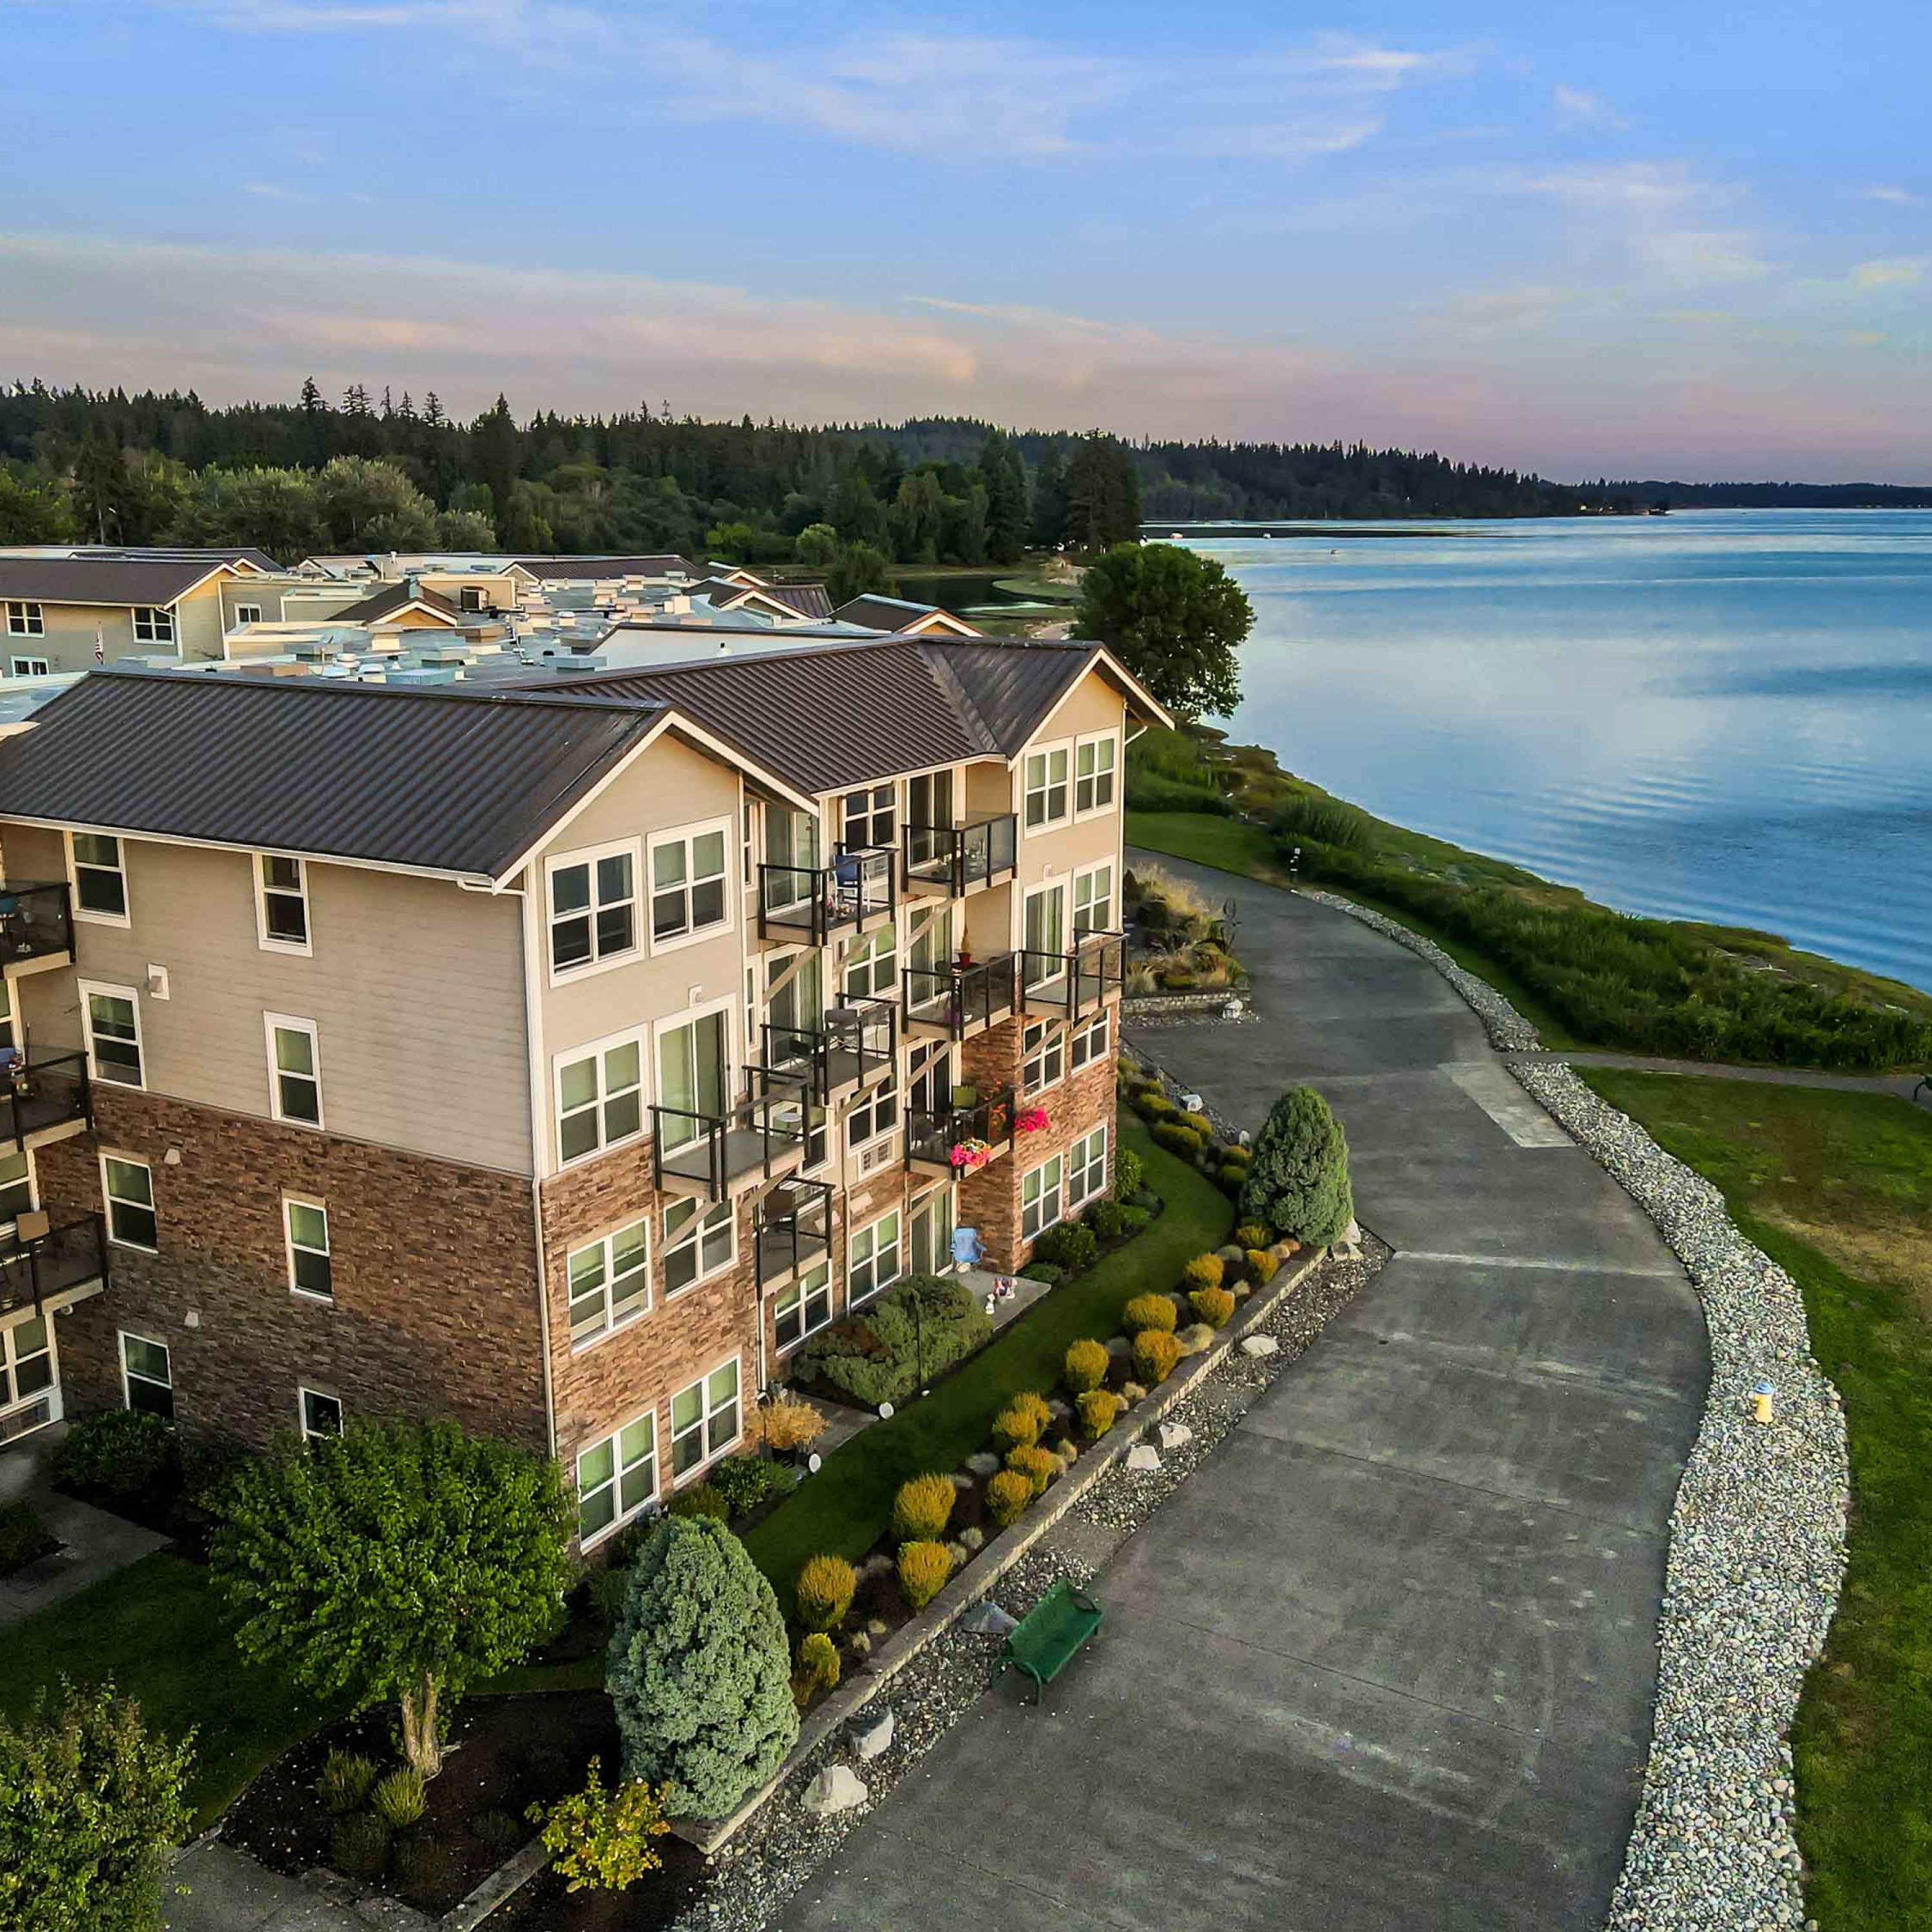 Aerial view of Crista Shores apartments and Dyes Inlet